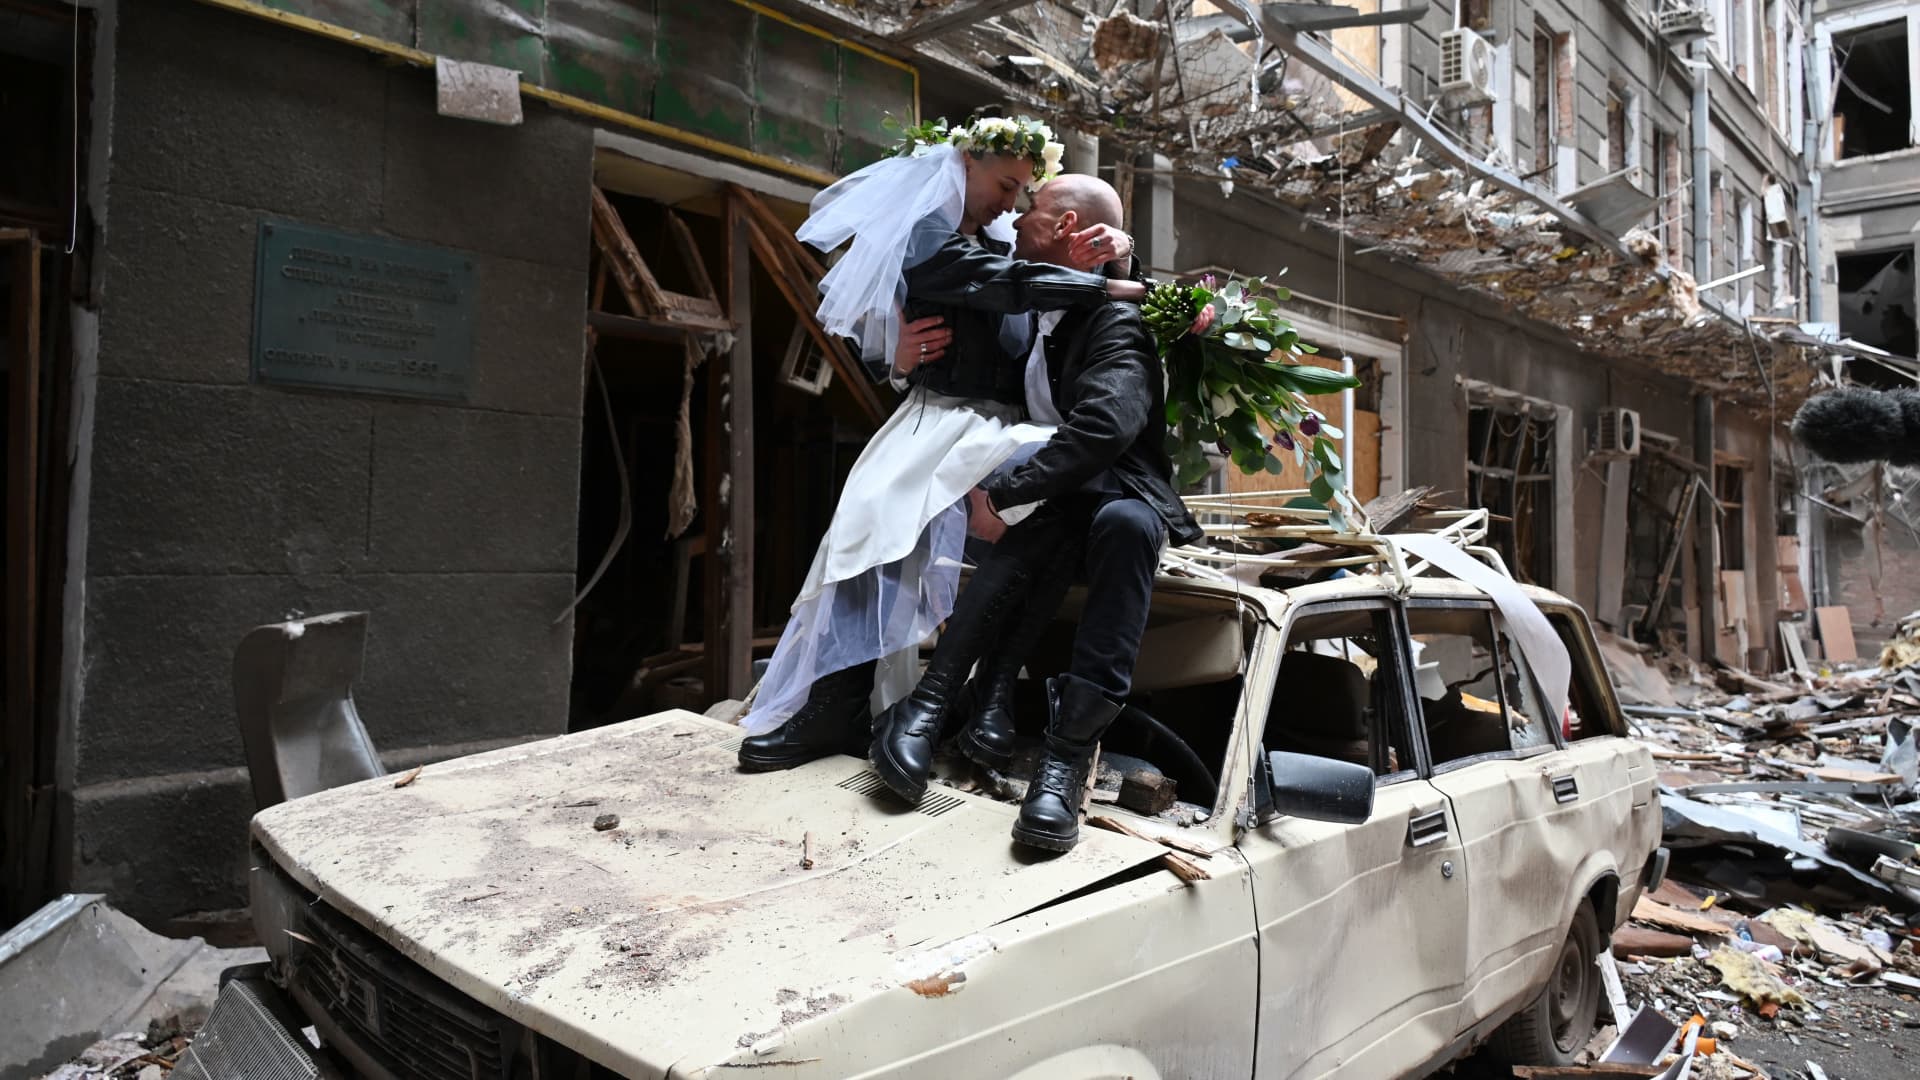 The newlyweds, medical volunteers, nurse in an oncology clinic and doctor before the start of the Russian invasion of Ukraine, Nastya Gracheva and Anton Sokolov, pose for a photograph in a ruined courtyard of shopping and office complex in central Kharkiv on April 3, 2022.